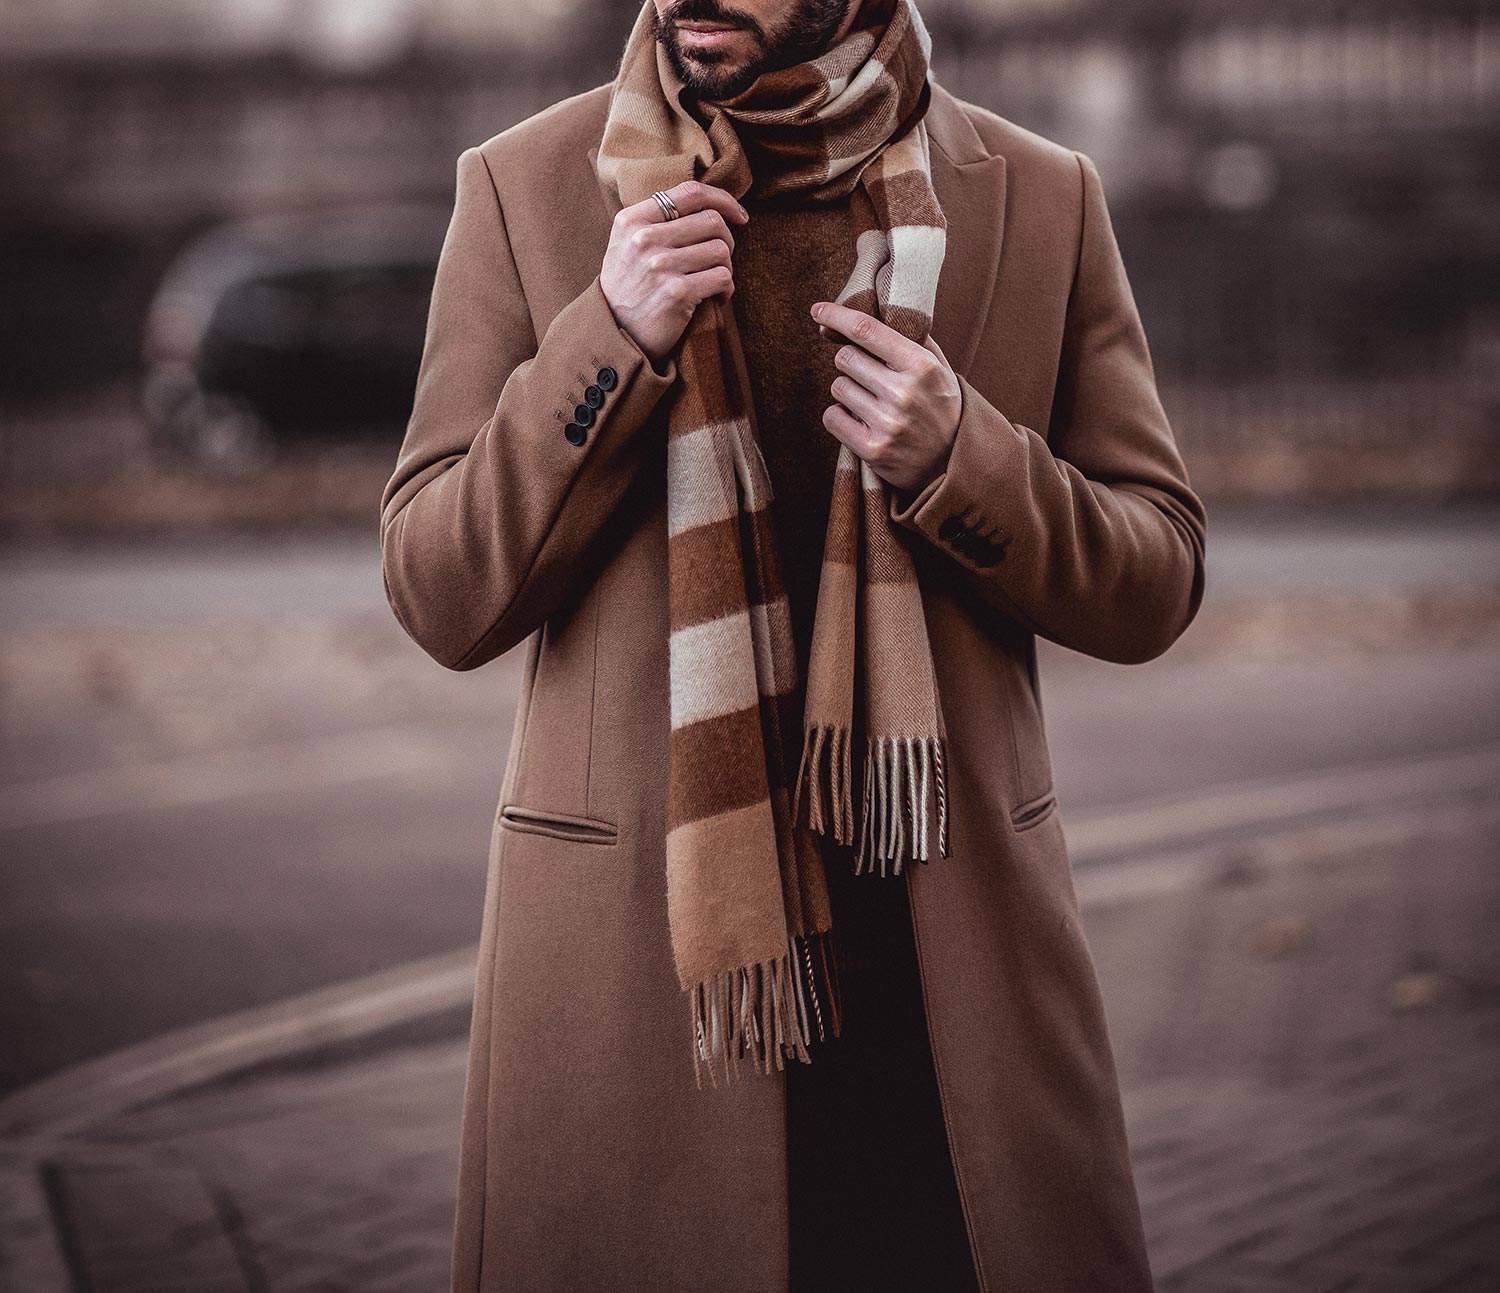 https://youraverageguystyle.com/wp-content/uploads/2023/11/Gents-Guide-To-Winter-Fashion-Essentials-Overcoat.jpg